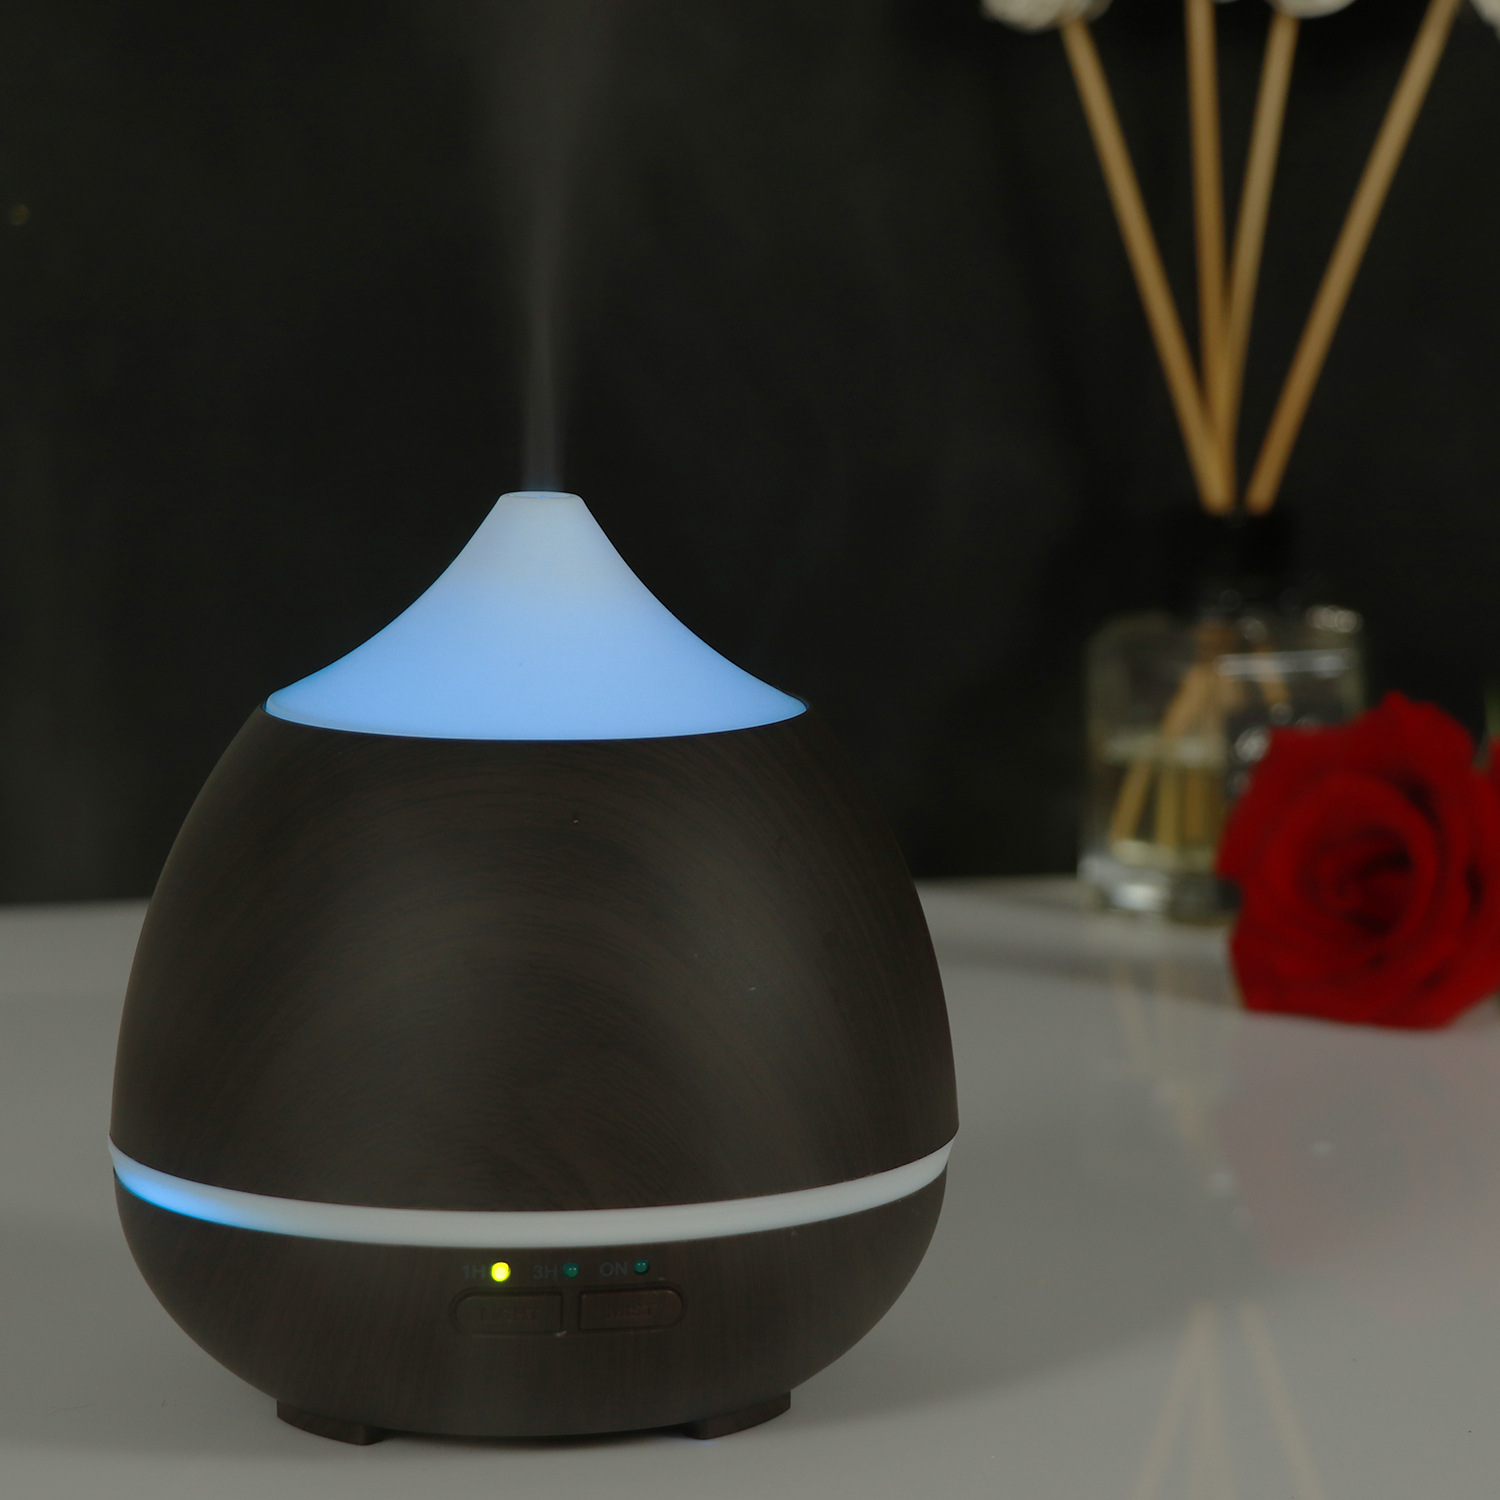 LED Essential Oil Diffuser Ultrasonic Aroma Diffuser Cool Mist 250ml Humidifier